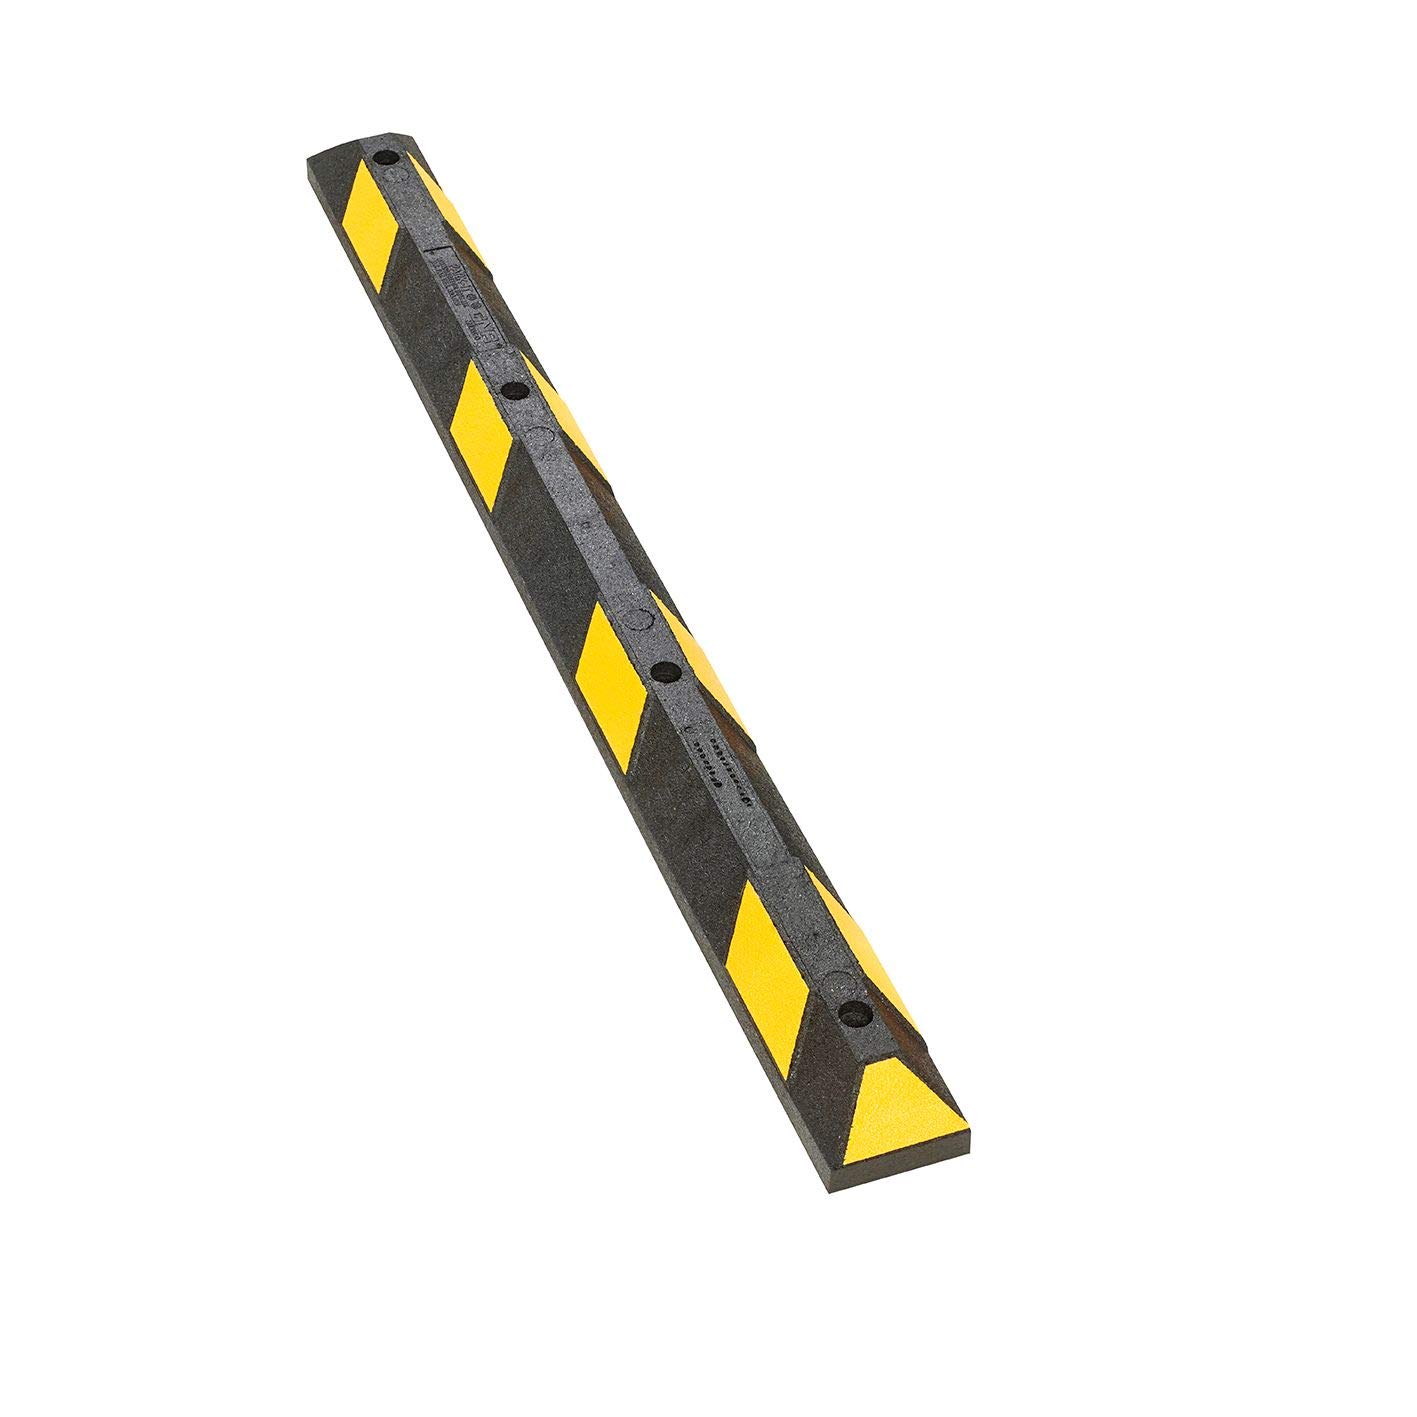 Park-It Recycled Rubber Parking Stop 4' L X 6" W X 4" H Black/Yellow